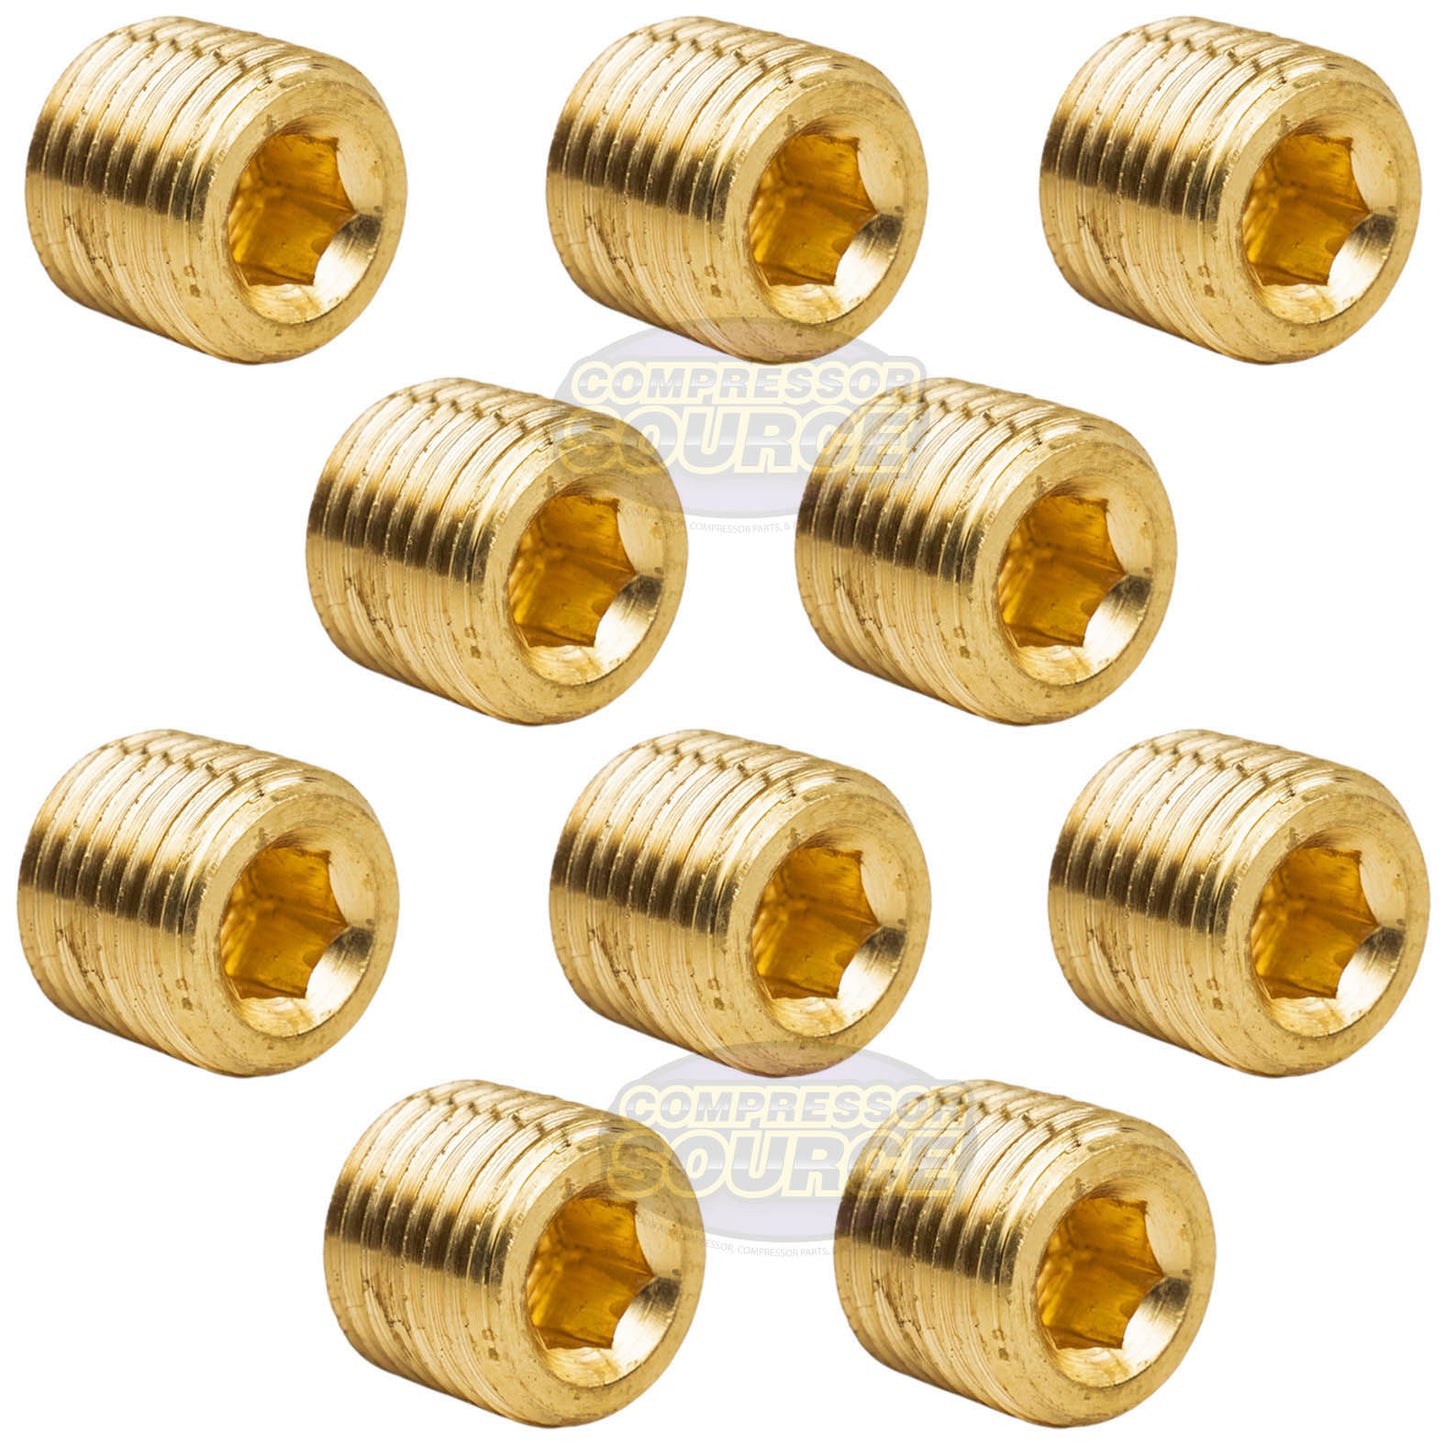 10 Pack Brass 1/4" Hex Pipe Plugs Countersunk Style Male NPT Pipe End Fitting